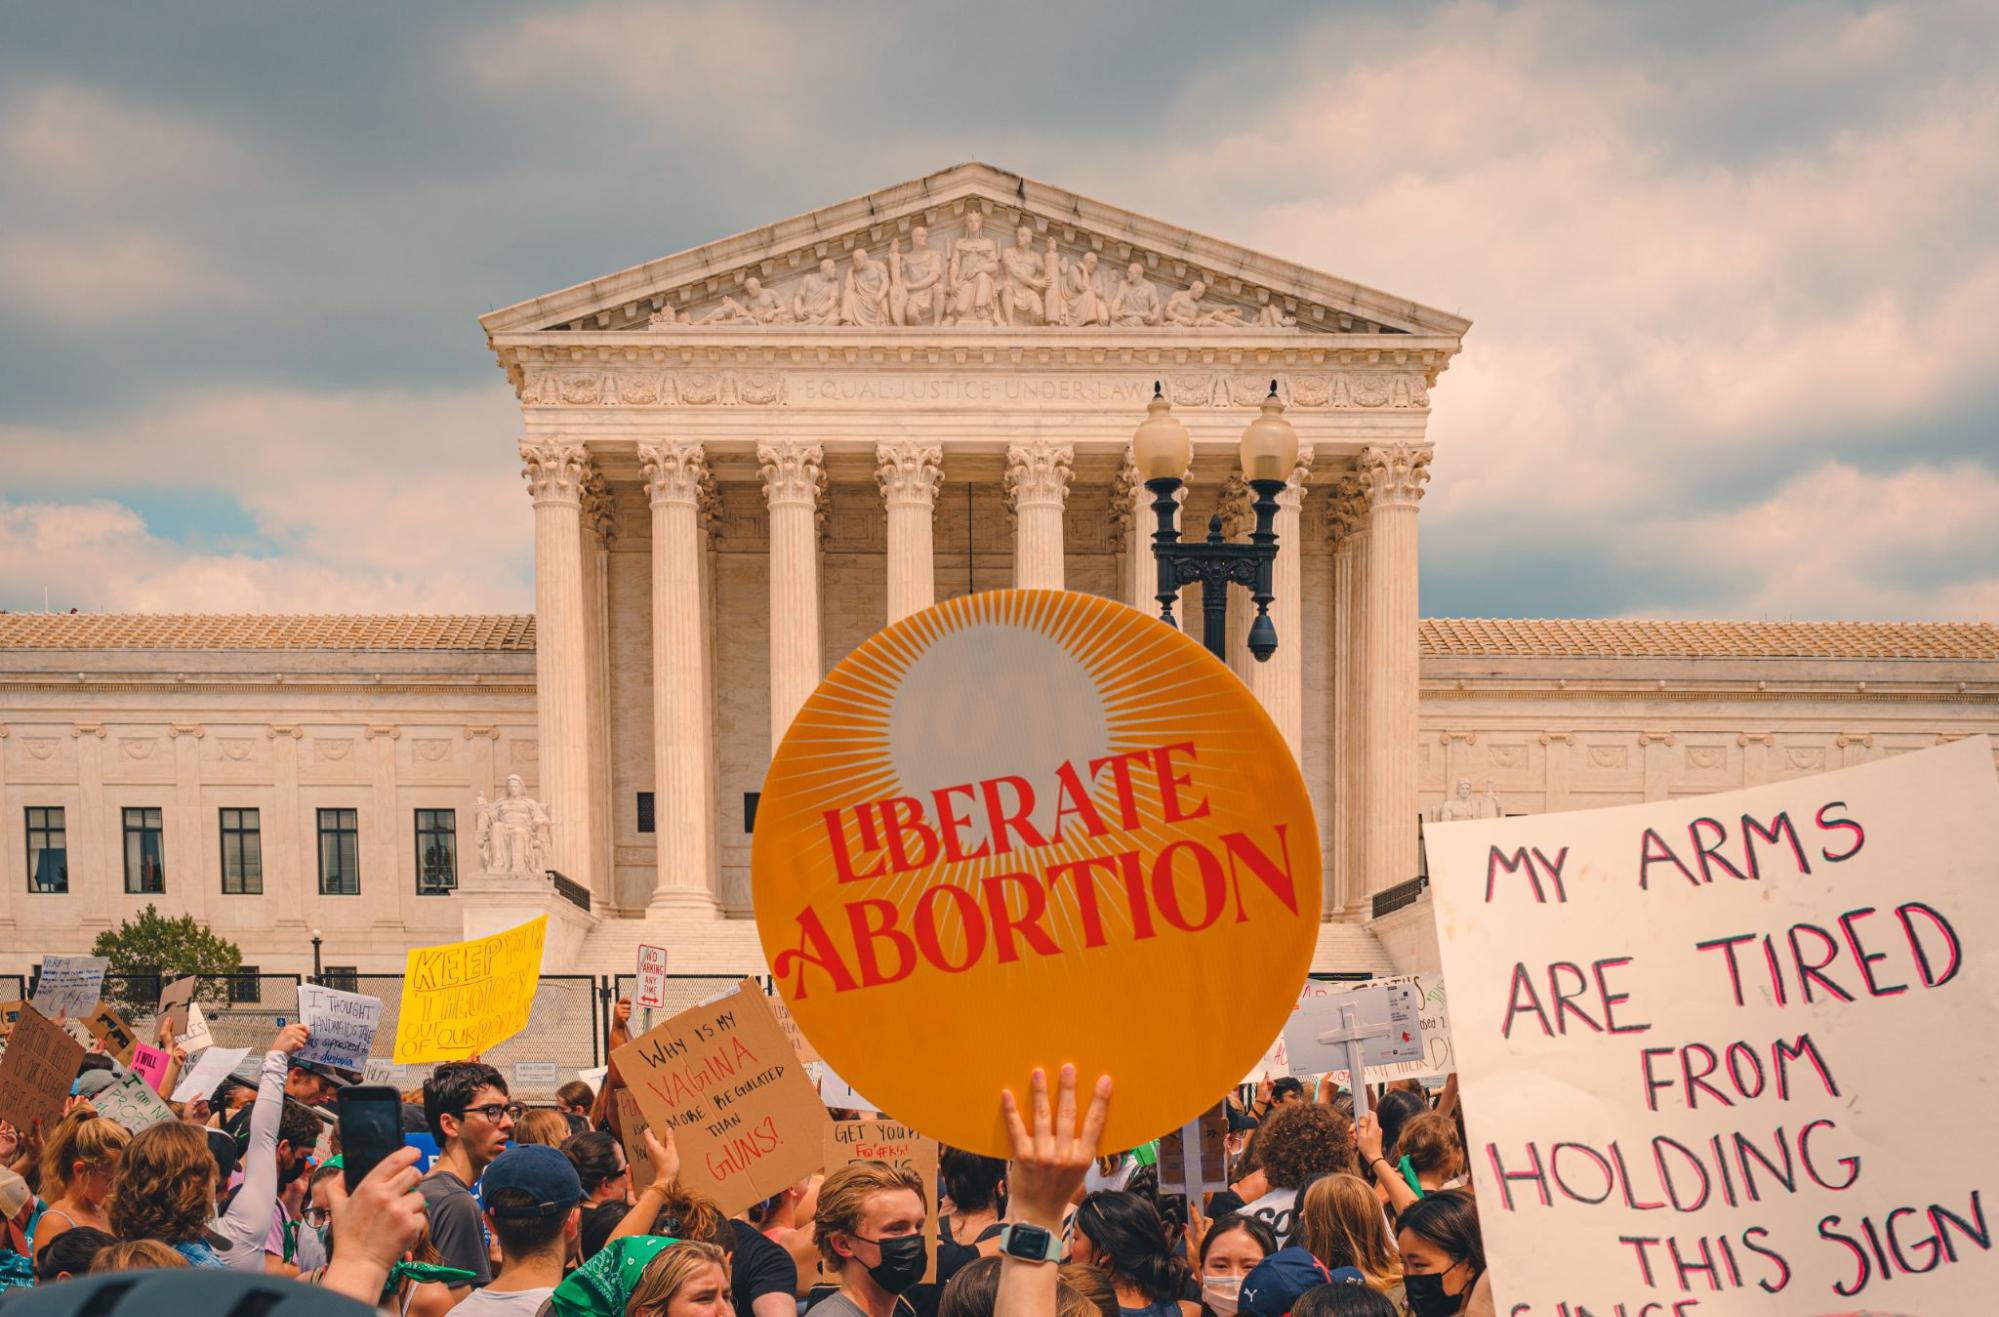 A crowd stands in front of the Supreme Court with signs that say liberate abortion and my arms are tired from holding this sign.